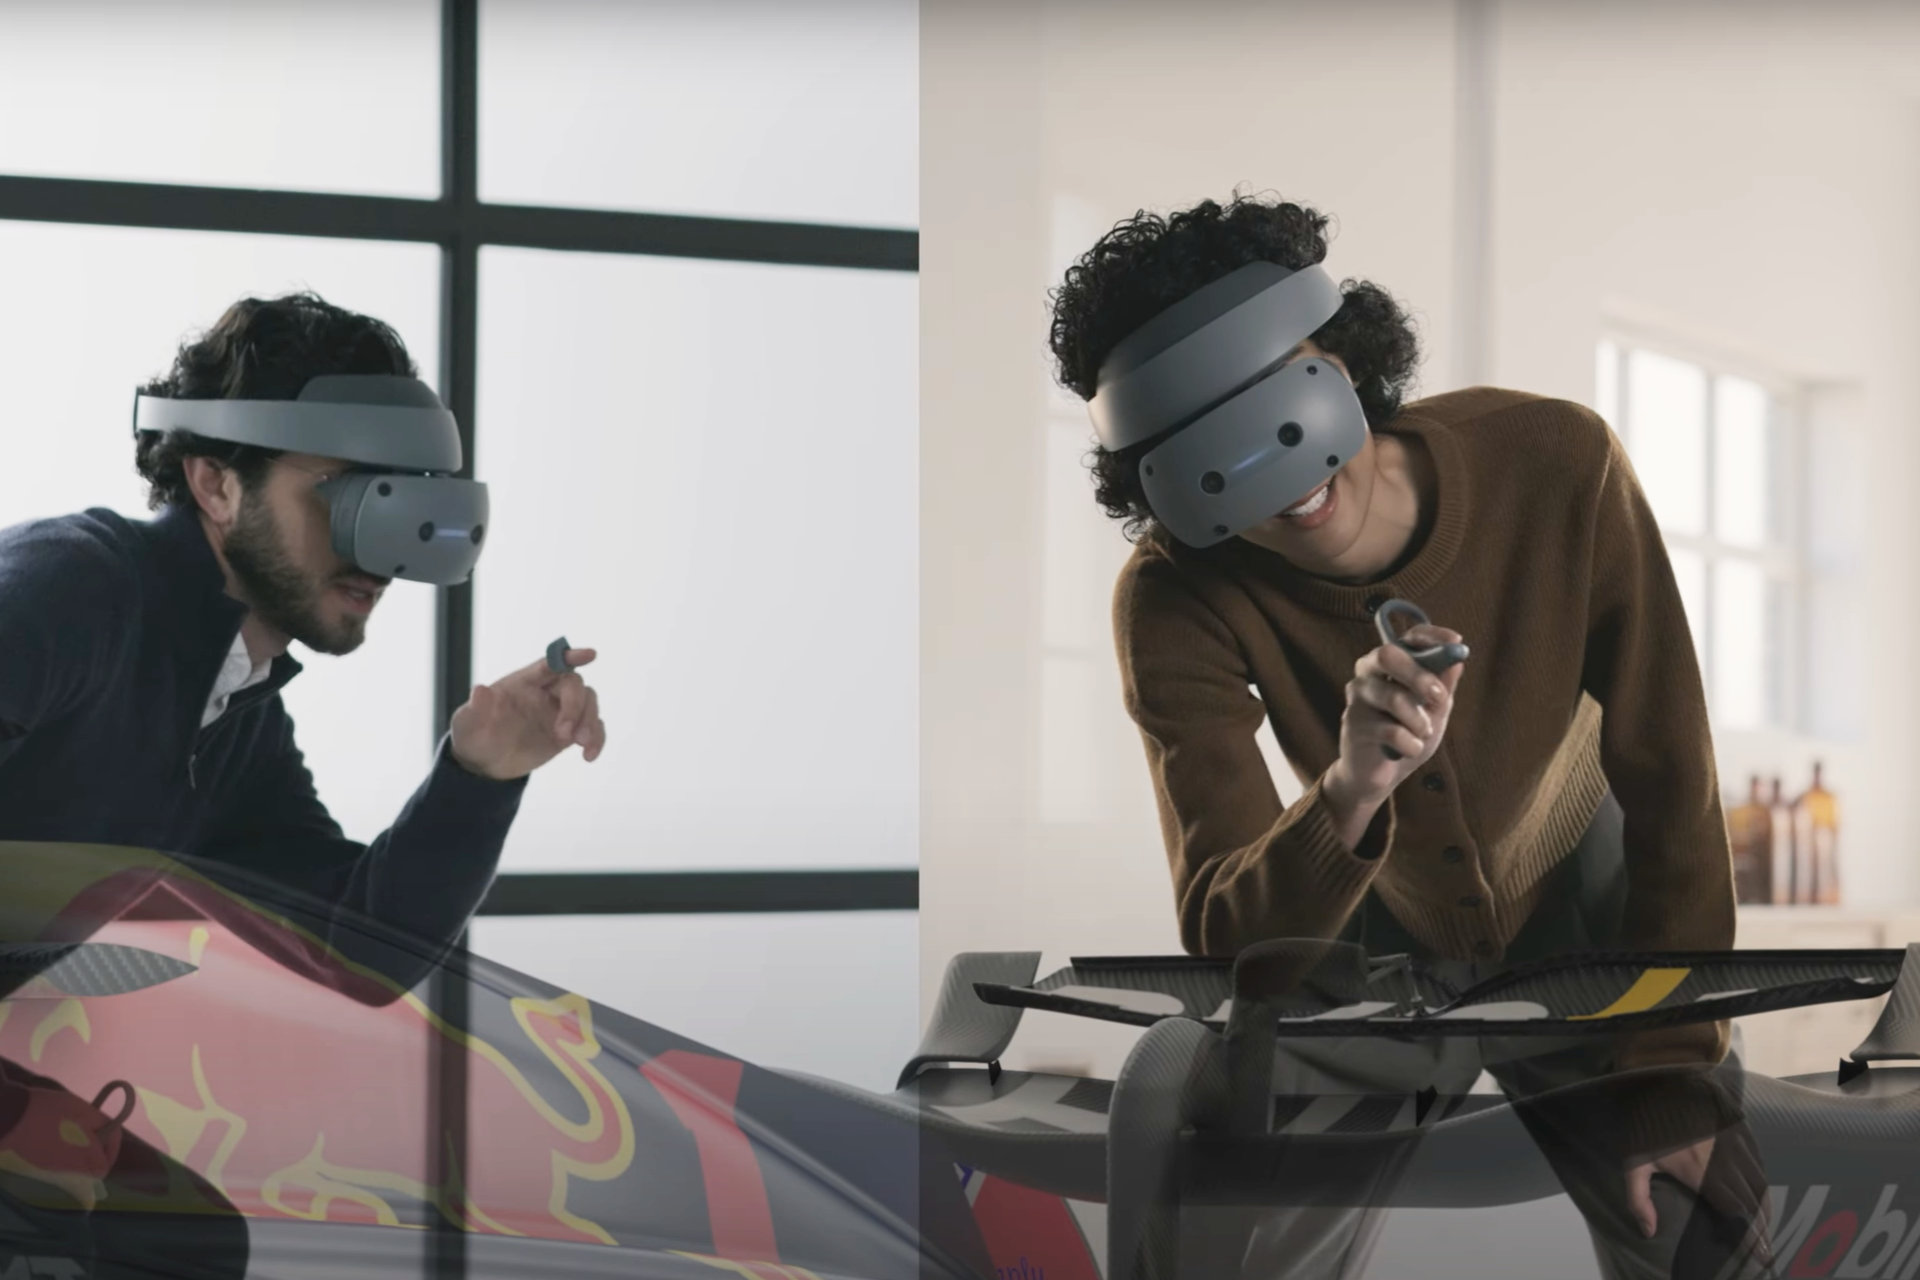 Sony's XR headset has a flip-up visor and unique ring and stylus controllers.